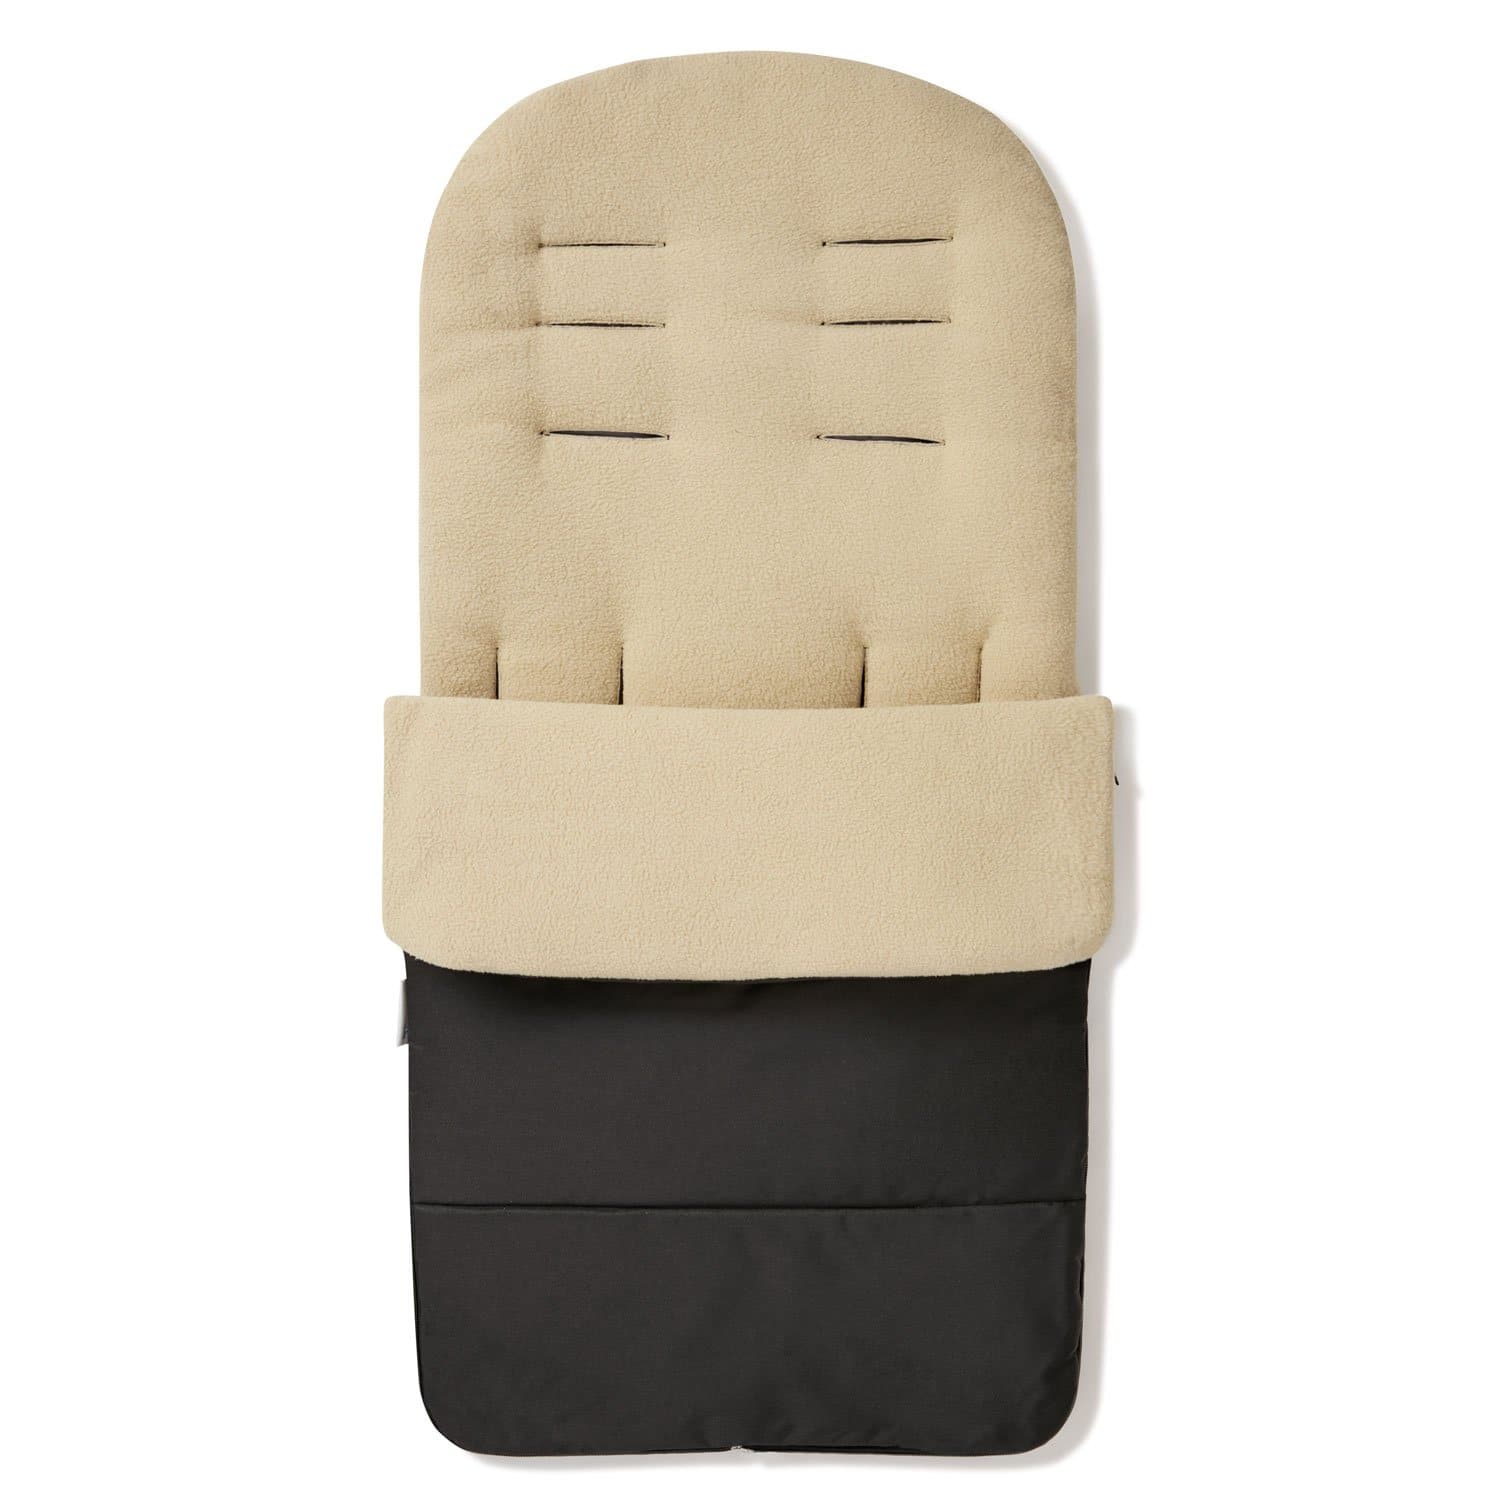 Premium Footmuff / Cosy Toes Compatible with Concord - Desert Sand / Fits All Models | For Your Little One